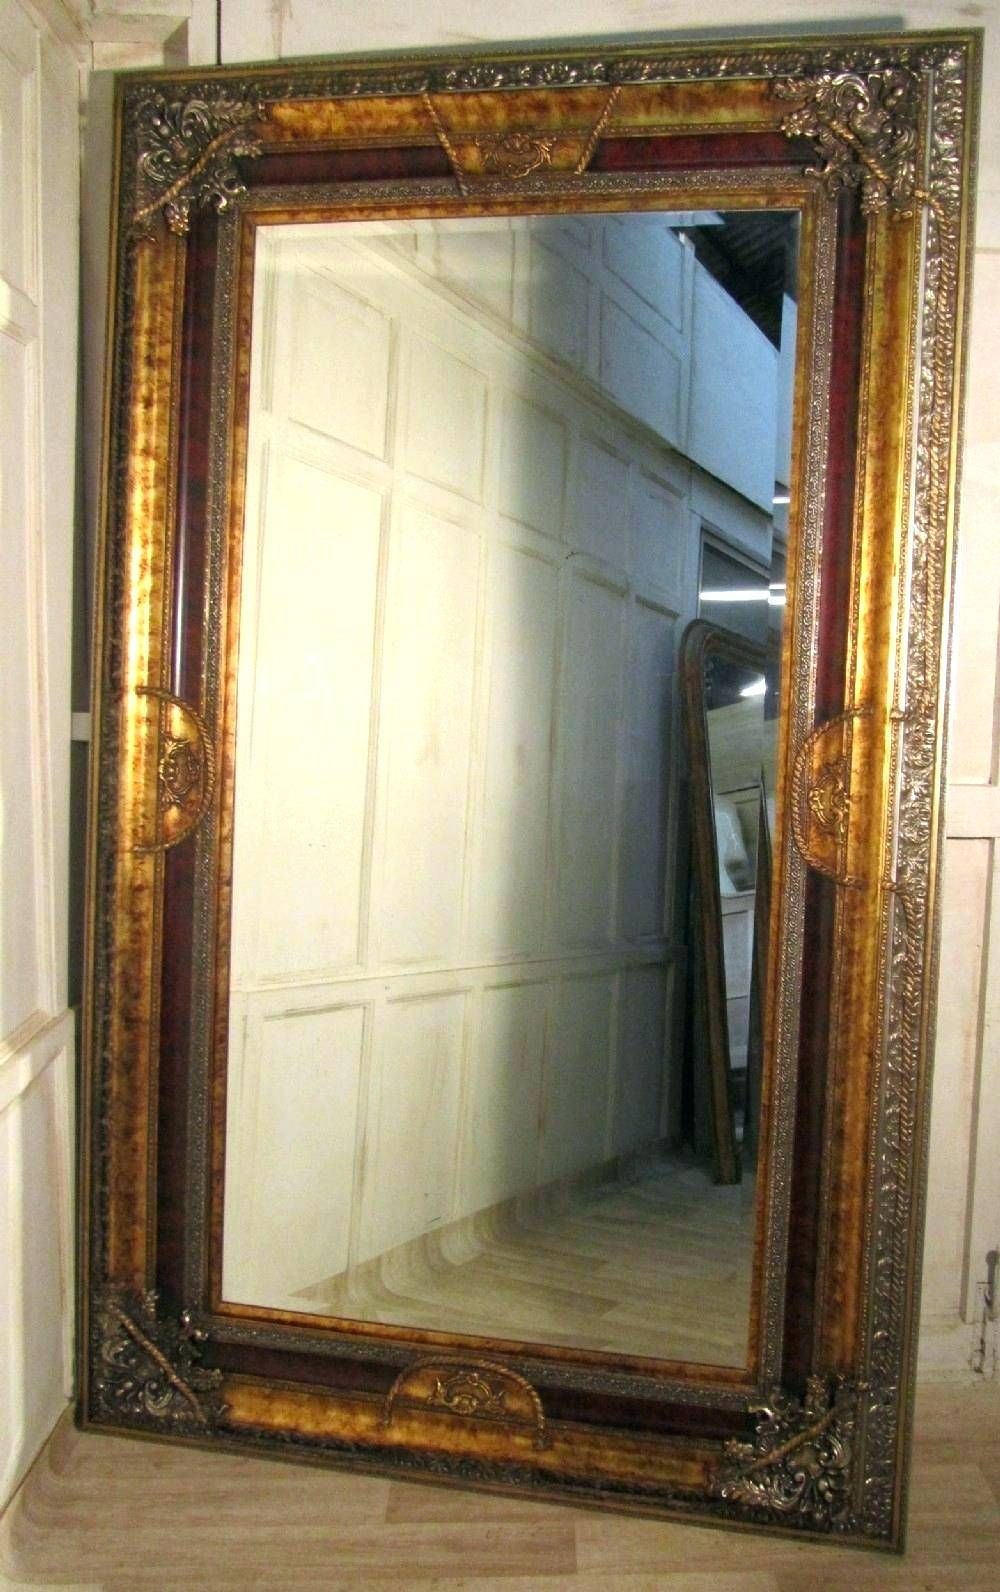 Wall Mirrors ~ Antique Gold Mirrors Antique Wall Mirrors For Sale Throughout Shabby Chic Gold Mirrors (View 10 of 15)